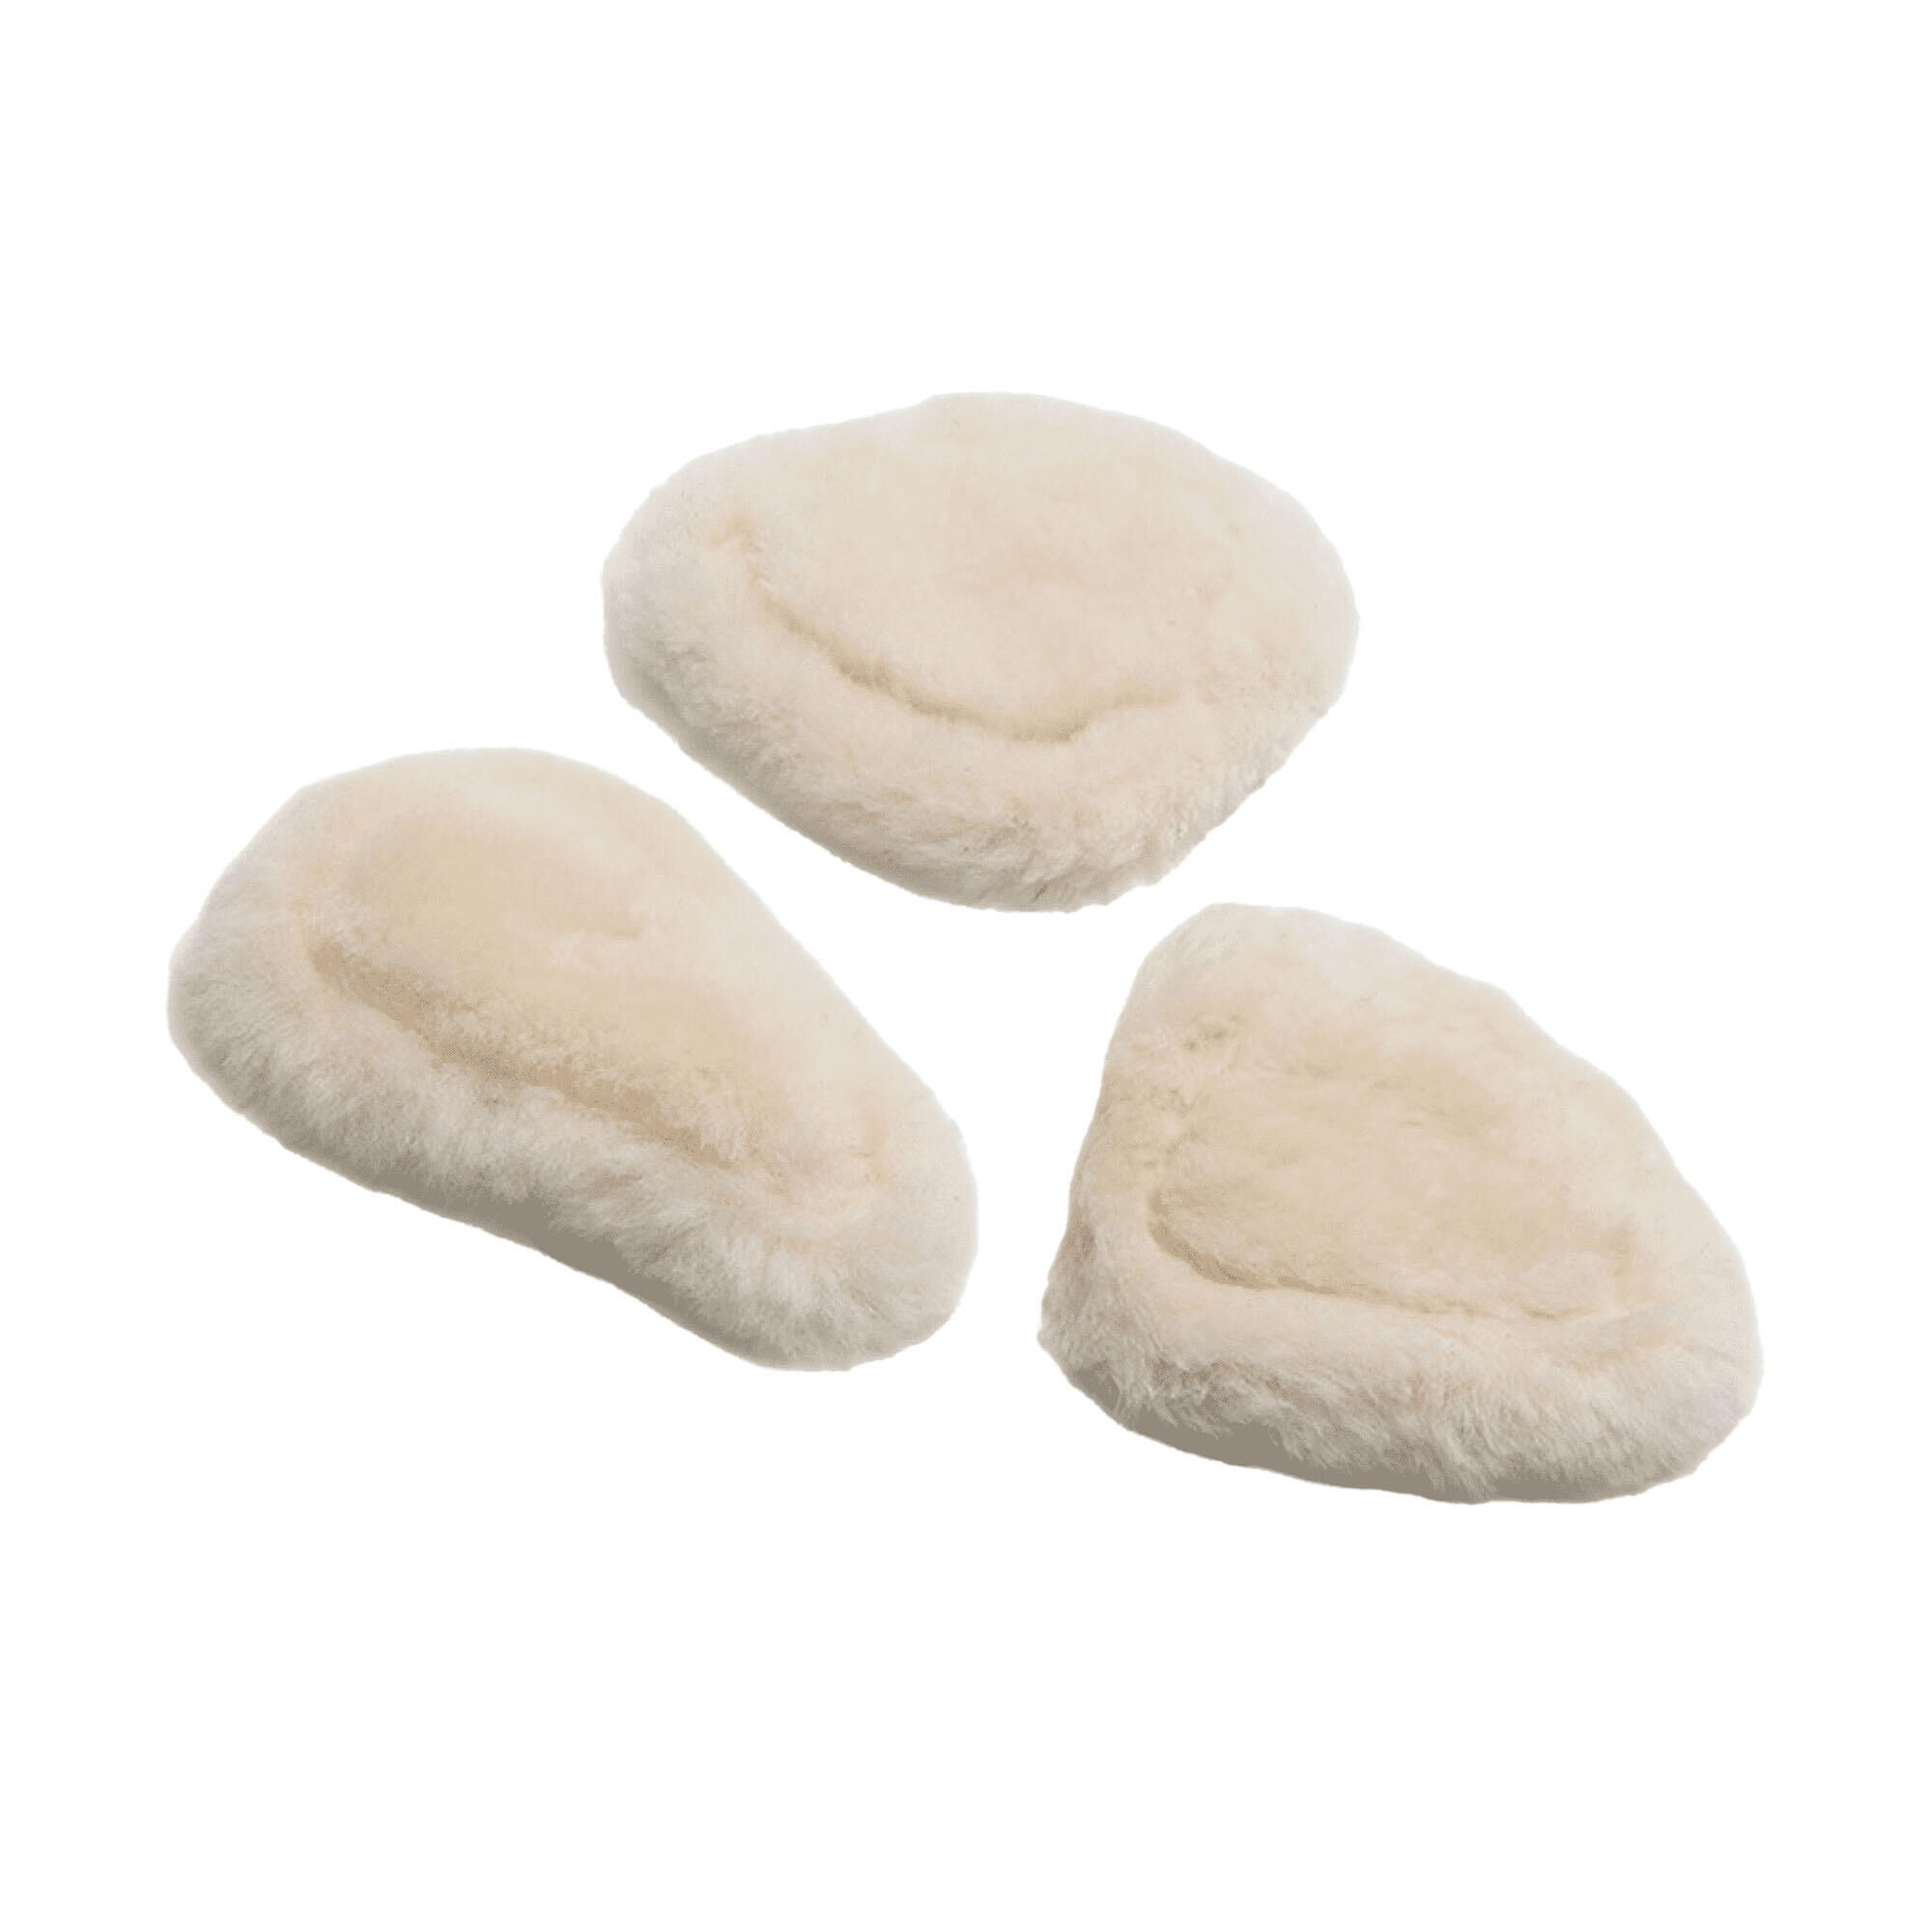 SHIRES Sheepskin Horse Breastplate Pads Set (Pack of 3) (White)